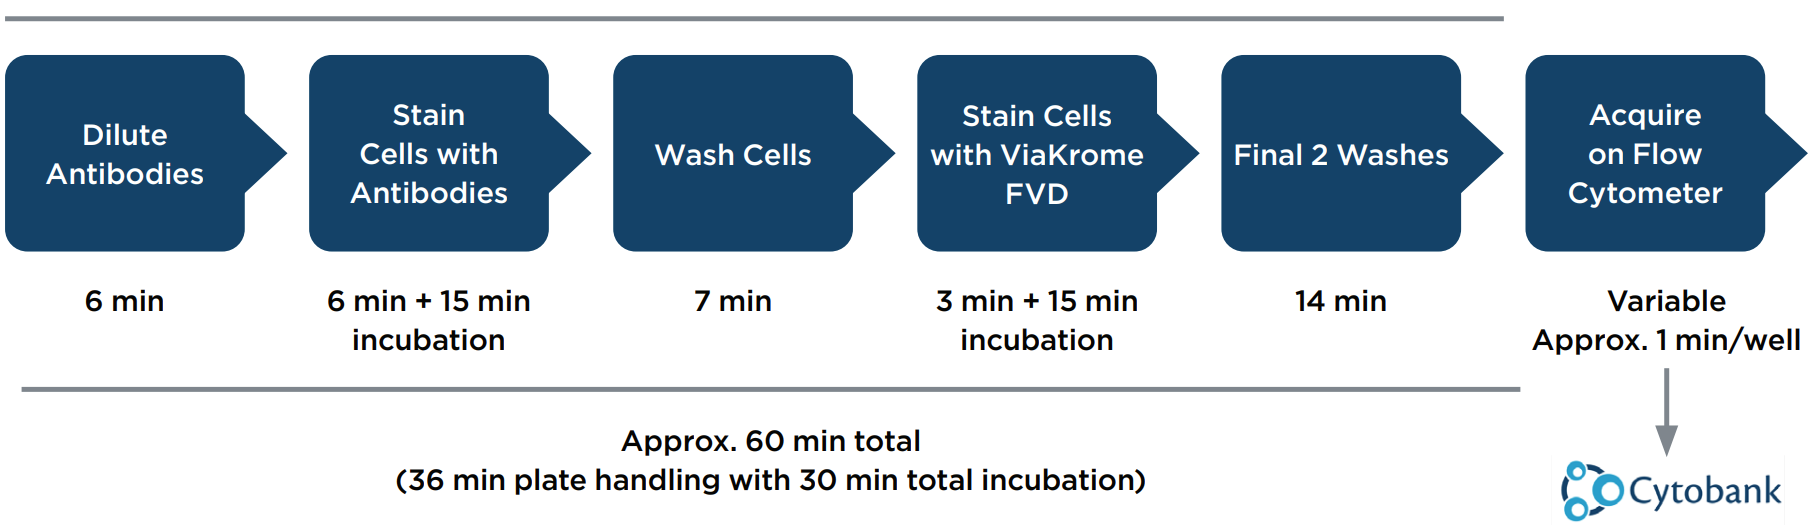 Automated and Streamlined Antibody Titration Workflow